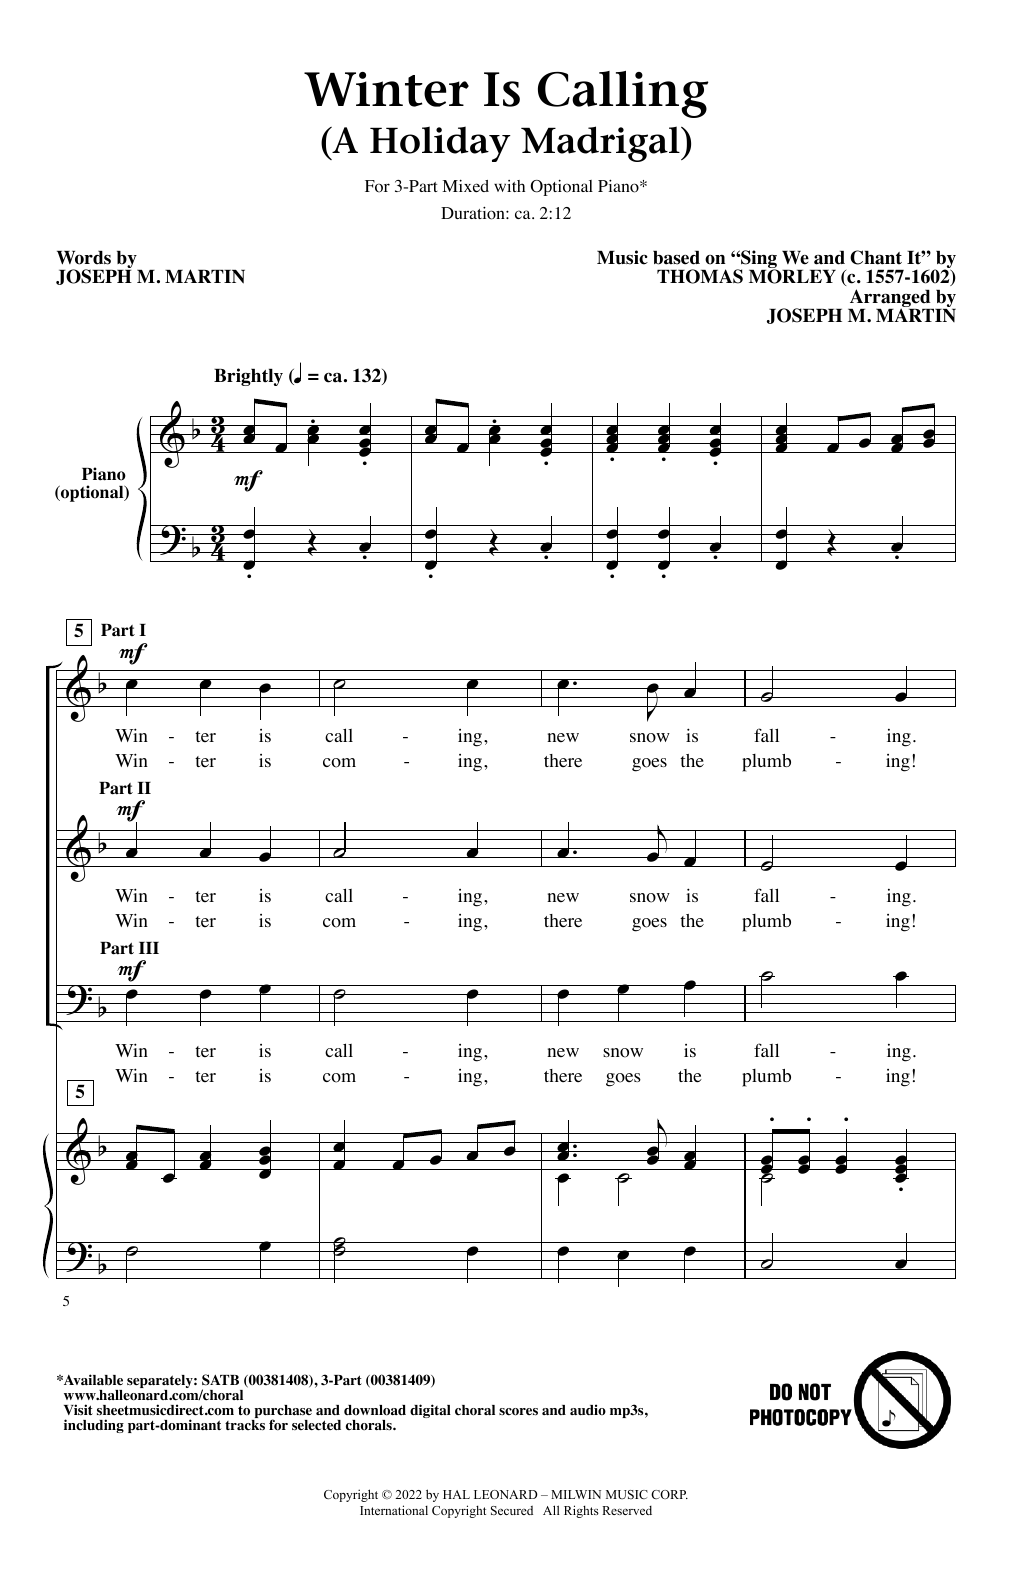 Download Joseph M. Martin Winter Is Calling (A Holiday Madrigal) Sheet Music